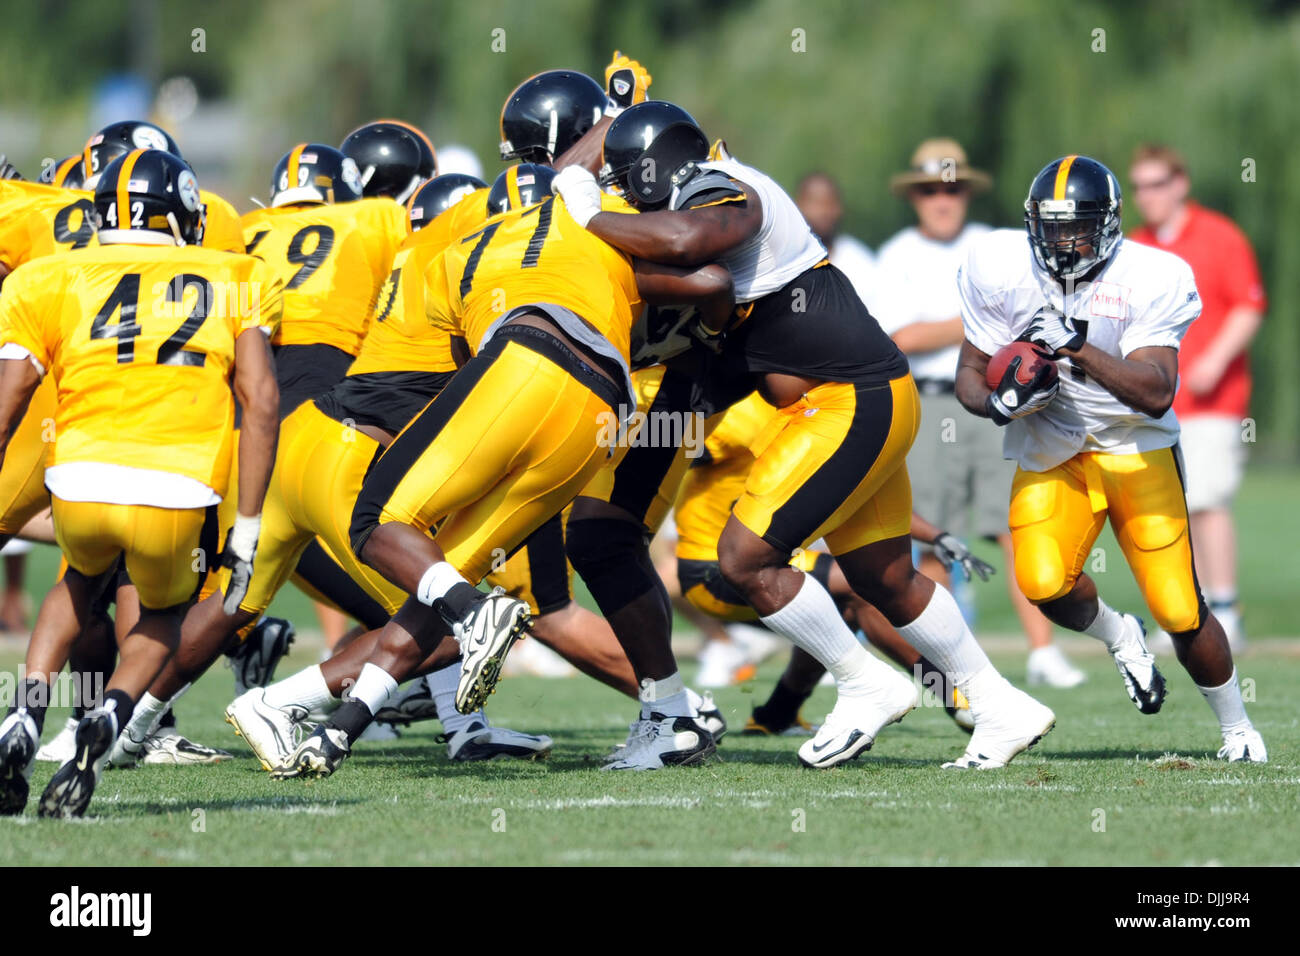 Aug. 08, 2010 - Latrobe, Pennsylvania, United States of America - 08 August, 2010: Pittsburgh Steelersrookie RB JONATHAN DWYER (#41) turns the corner for a long gain at  St. Vincent College home of the Steelers training camp.  Mandatory Credit: Paul Lindenfelser/ Soutcreek Global (Credit Image: © Southcreek Global/ZUMApress.com) Stock Photo